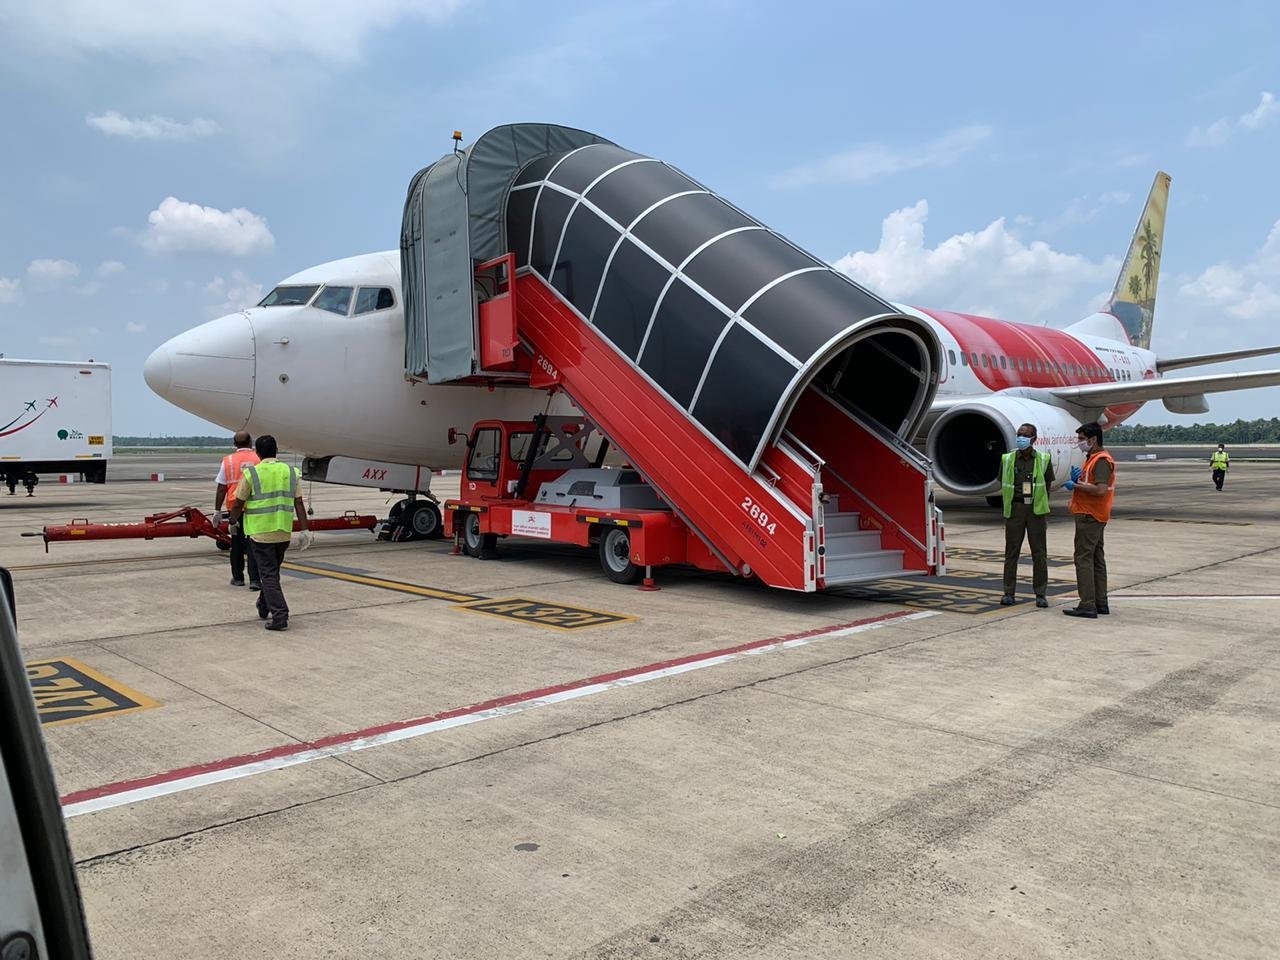 VandeBharatMission: First repatriation flight of Air India Express IX419 to take off from Kochi for Abu Dhabi today | See Pics